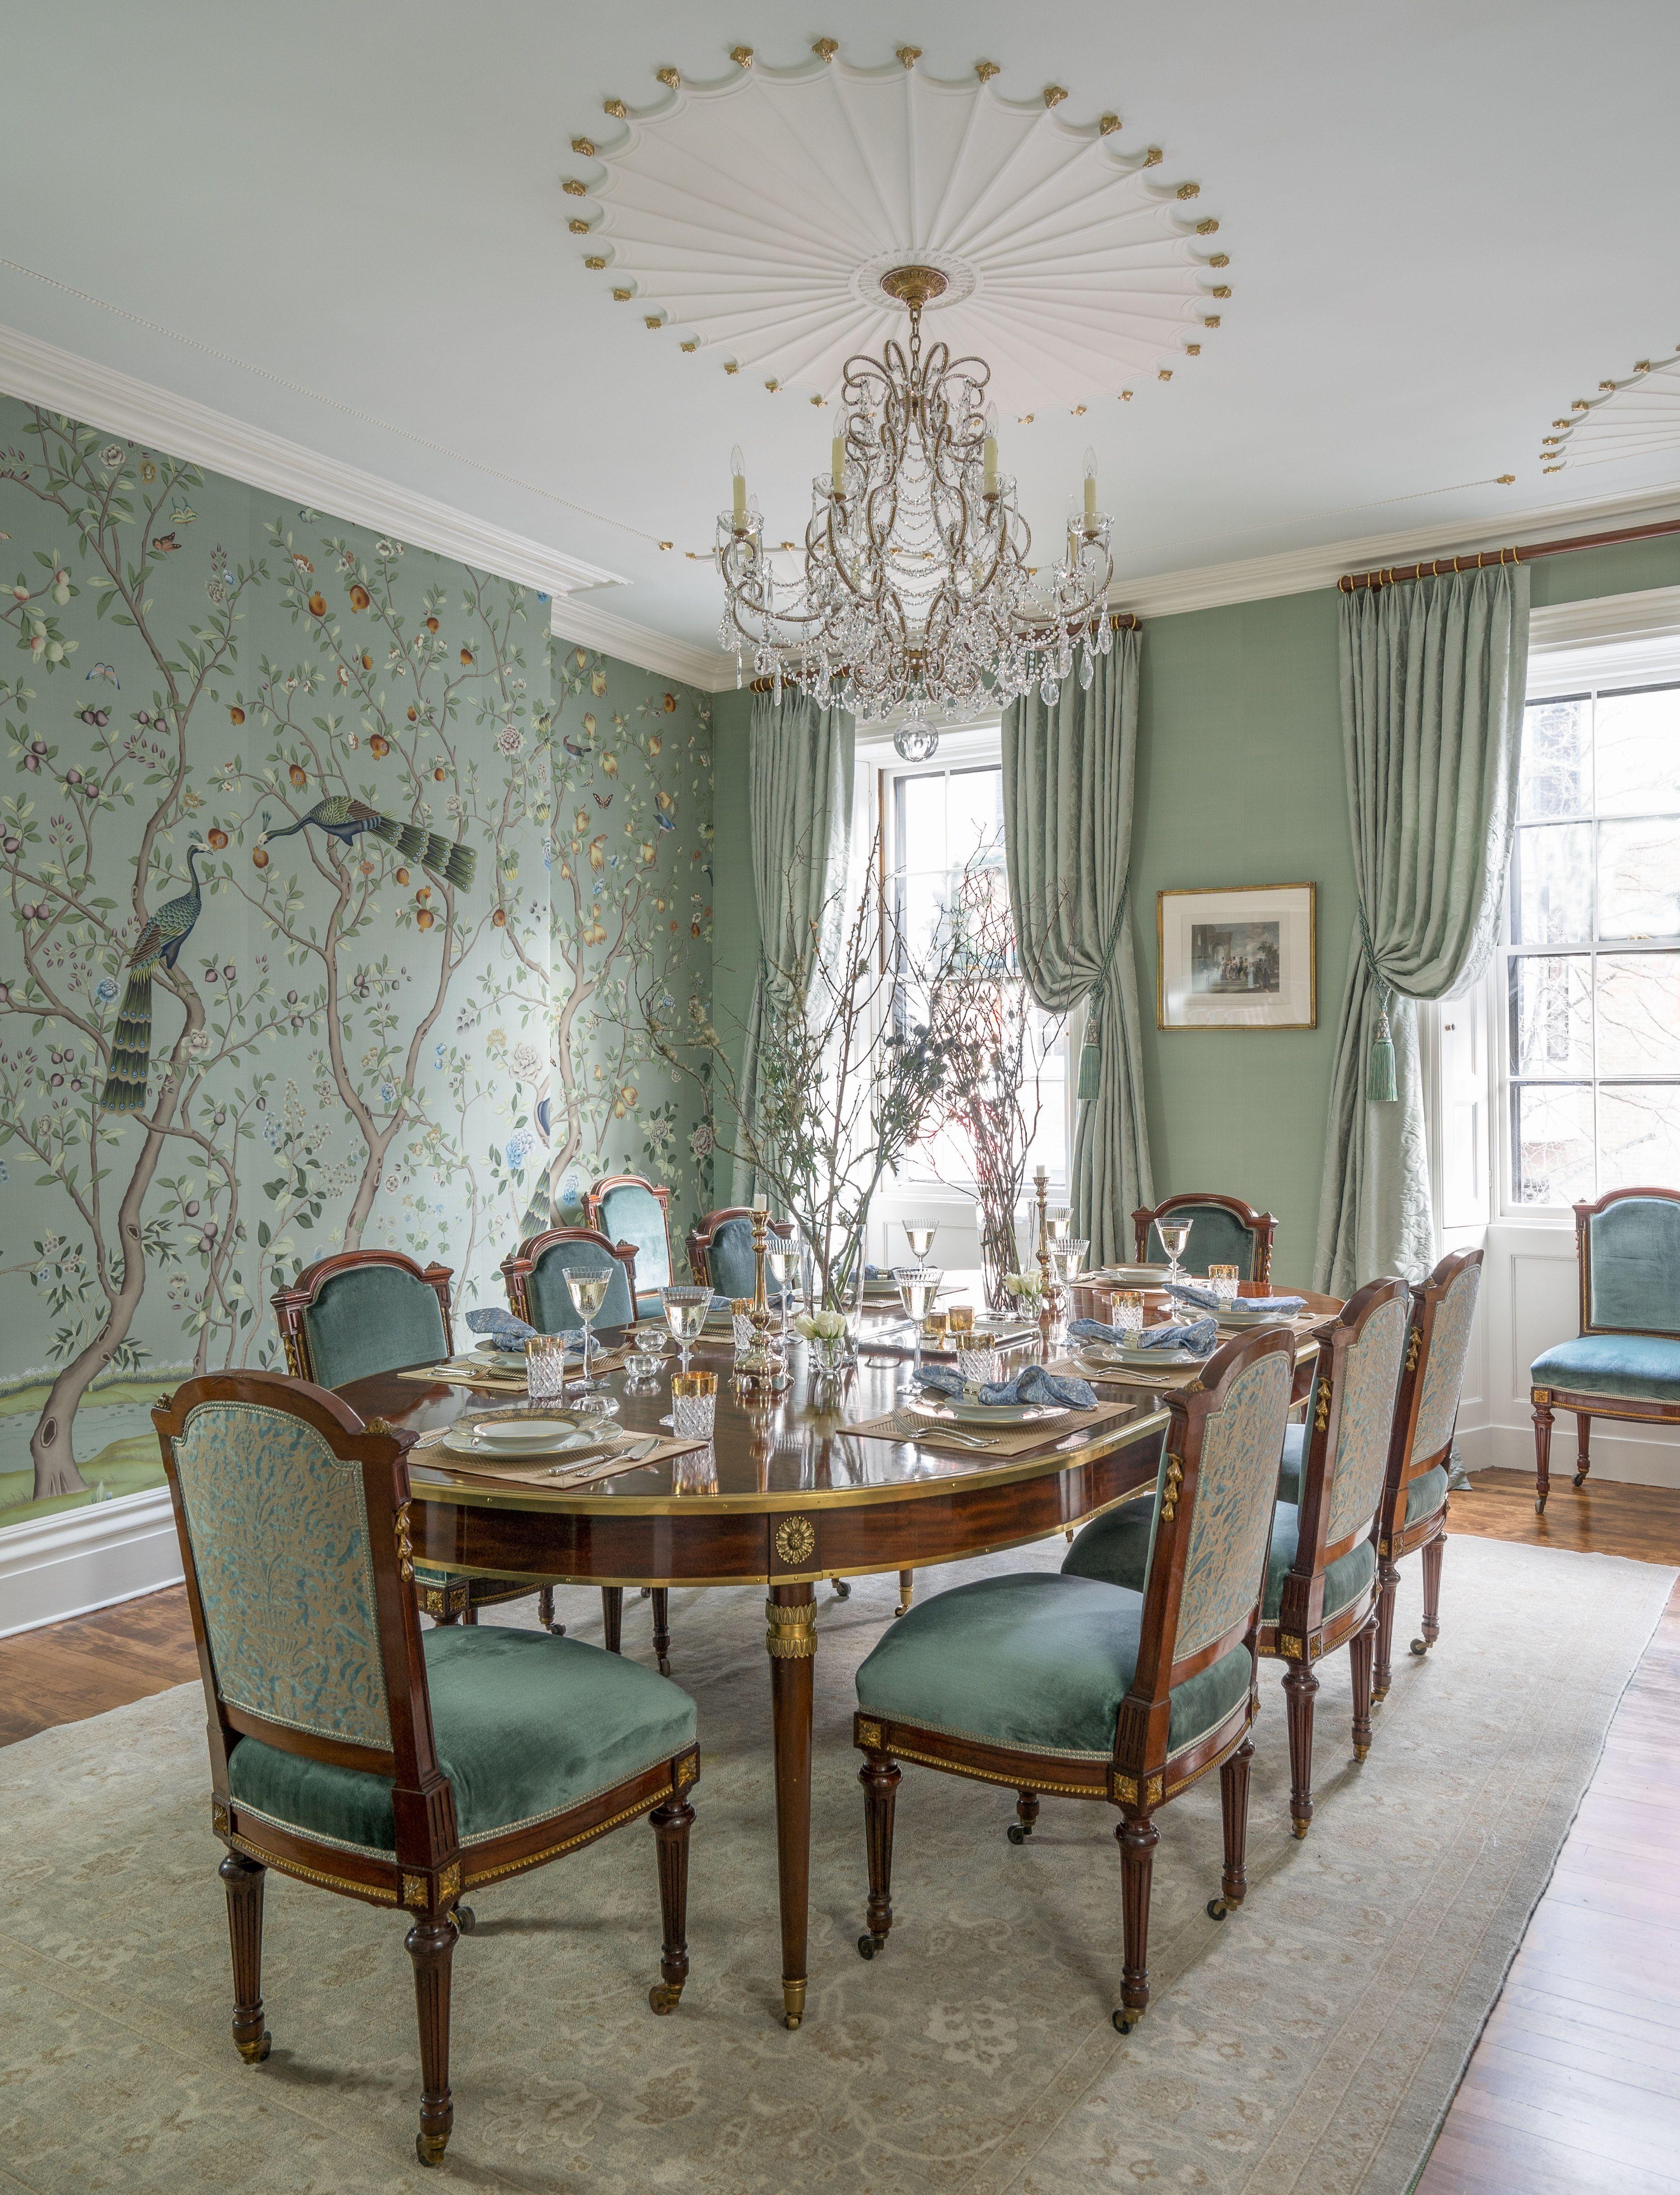 3716 x 4854 · jpeg - Beacon Hill Dining Room with Handpainted Silk Wallpaper and Louis XVI ...